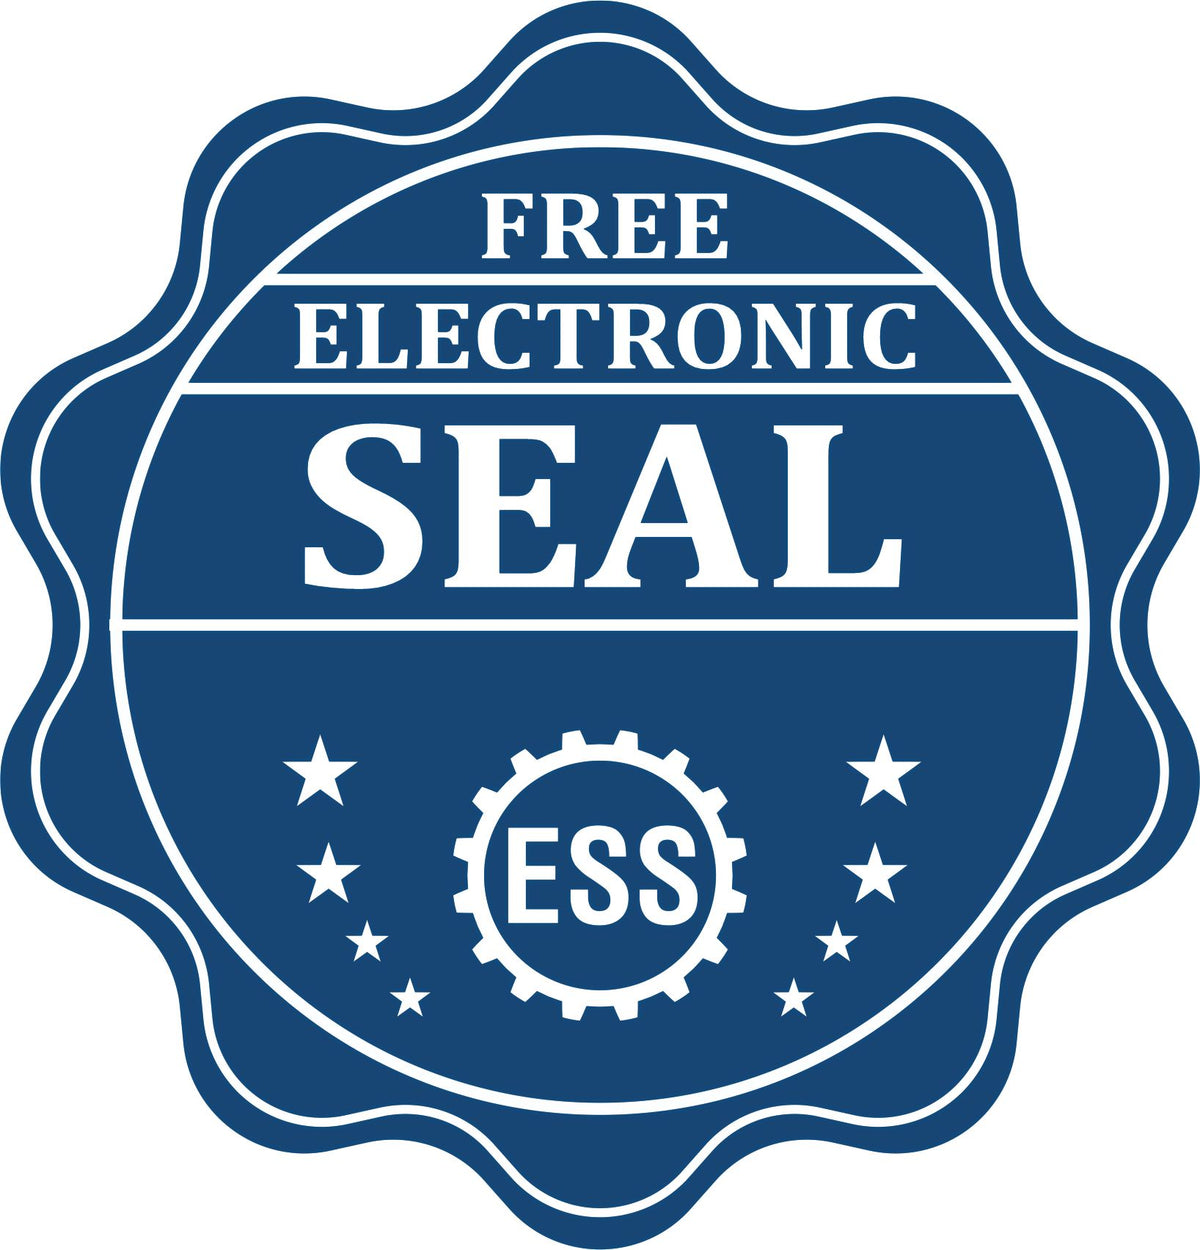 A badge showing a free electronic seal for the State of Kentucky Soft Land Surveyor Embossing Seal with stars and the ESS gear on the emblem.